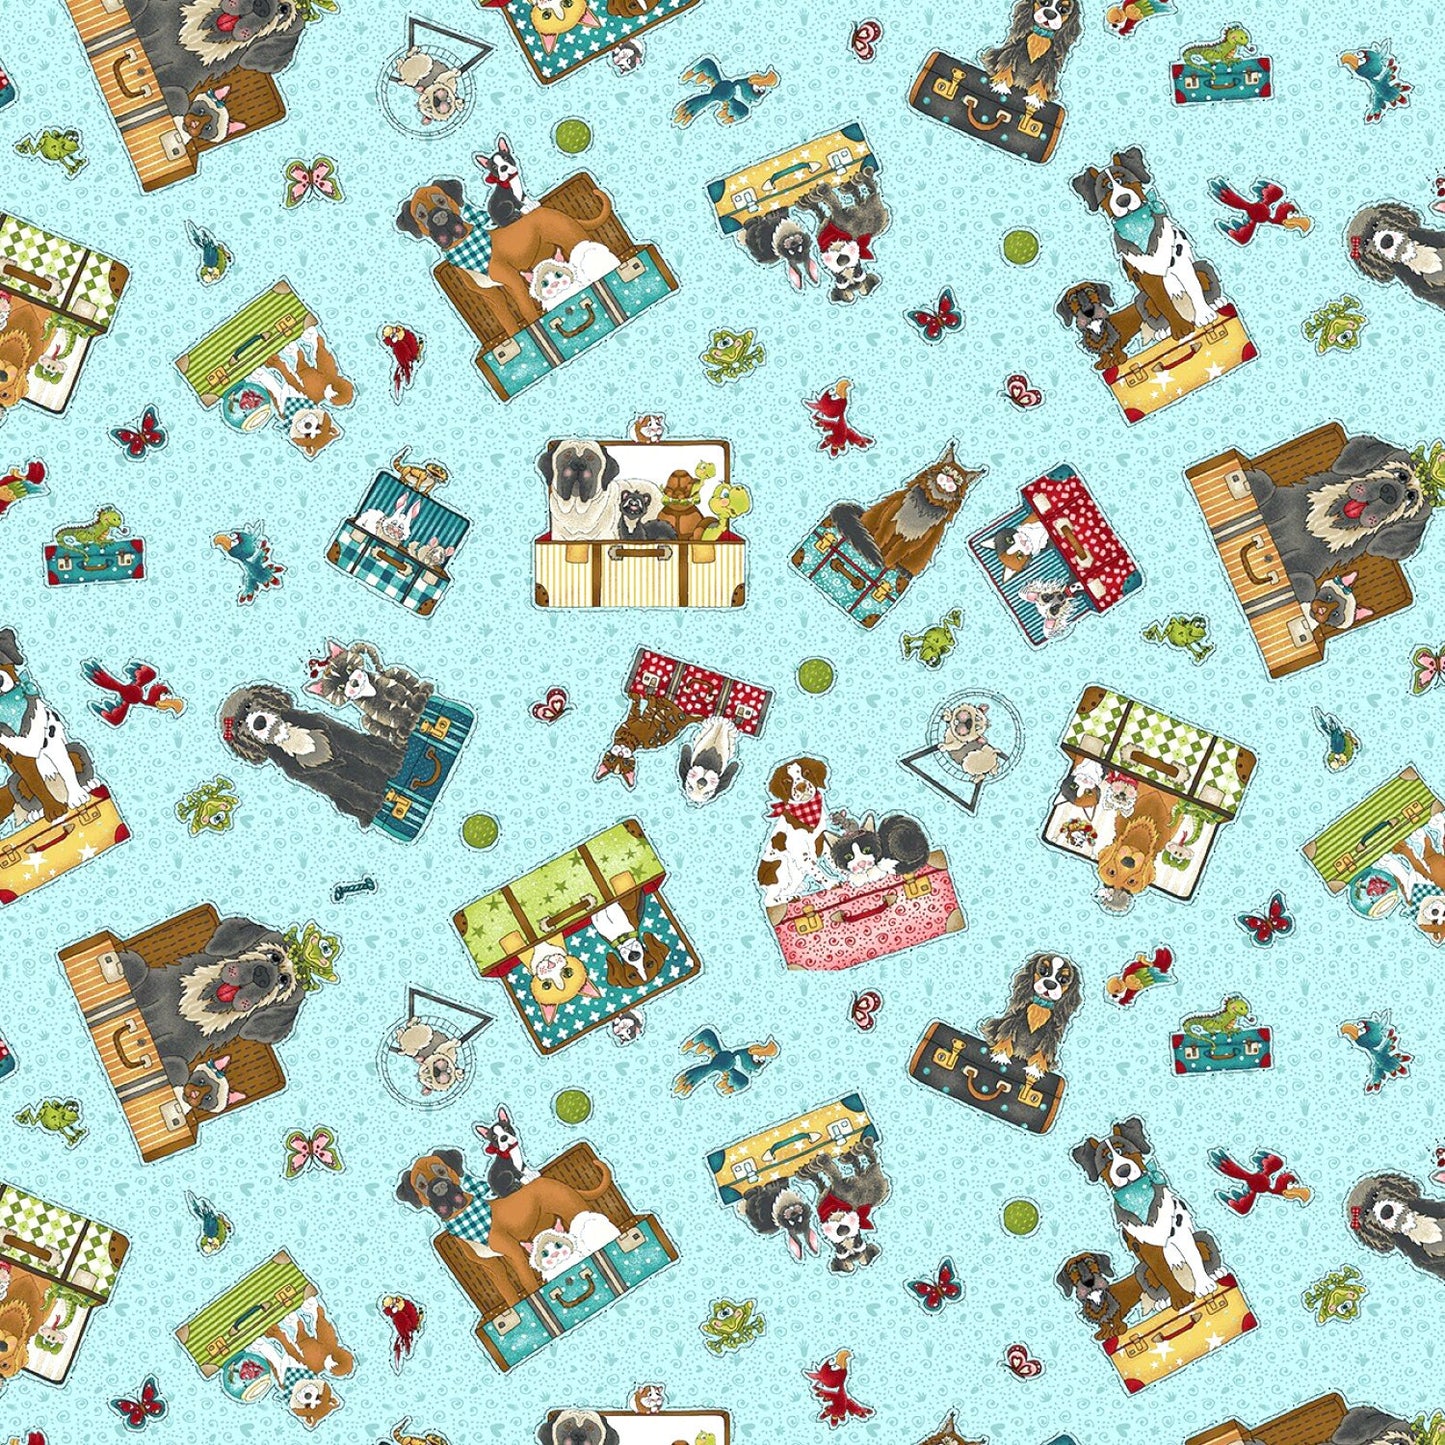 Animal Fabric by the yard - Next Stop Home - Pets in Suitcases from Henry Glass - 100% Cotton Fabric - rescue dog fabric - SHIPS NEXT DAY